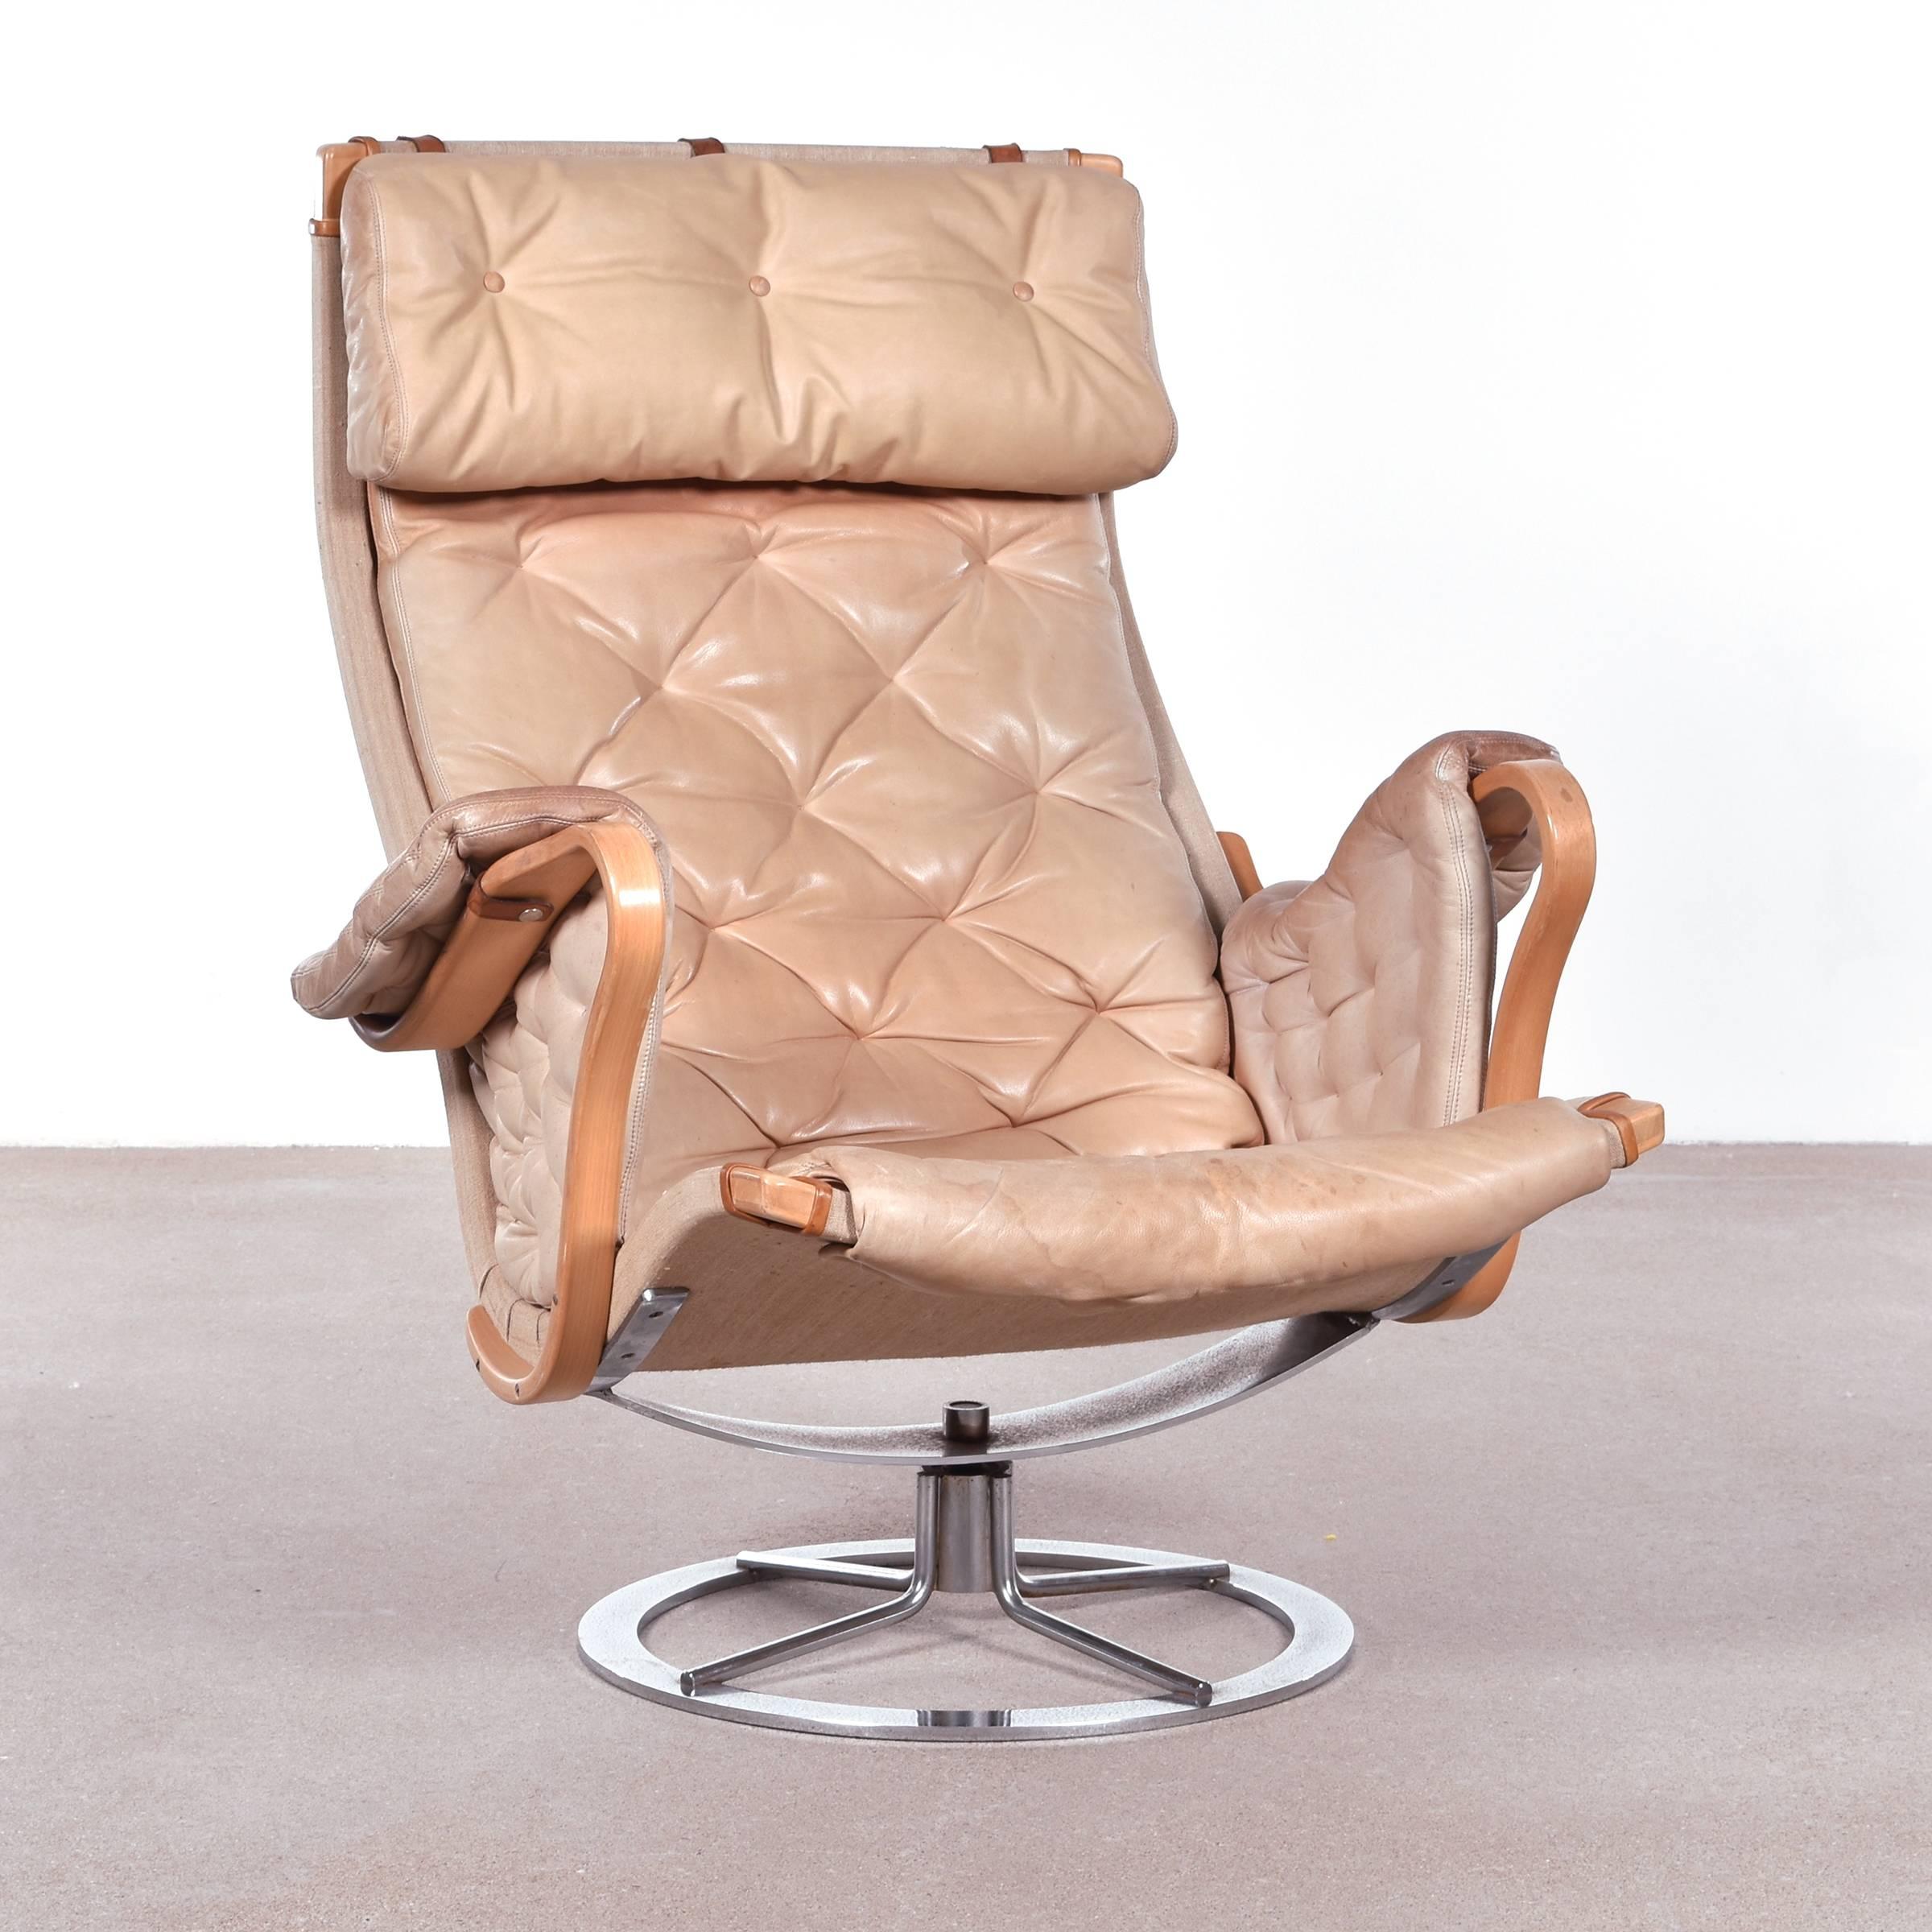 Beautiful and comfortable easy chair by Bruno Mathsson. Rare version with swivel chrome plated steel base. Molded beech frame with canvas and leather upholstery in good original condition.

Free shipping for European destinations!

We strive for